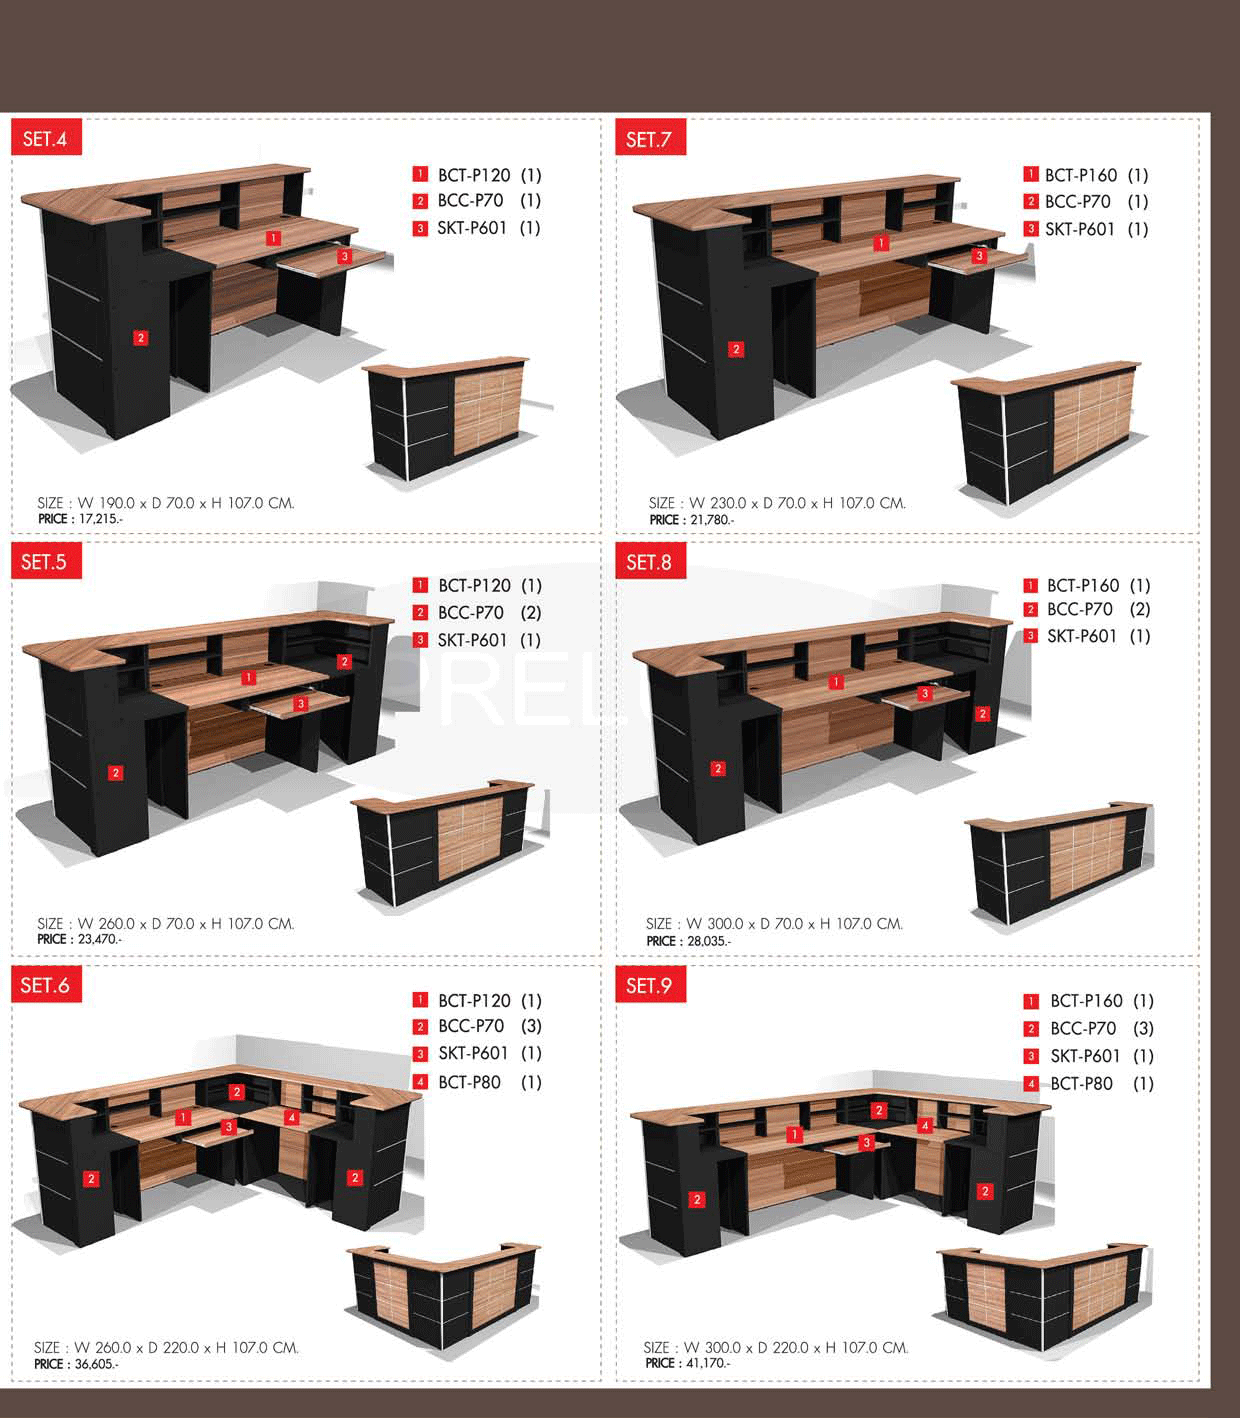 712625221::COUNTER-SET-8::A Prelude melamine office table set, including 1 BCT-P160, 2 BCC-P70 and 1 SKT-P601. Dimension (WxDxH) cm : 300x70x107 PRELUDE Coun Table